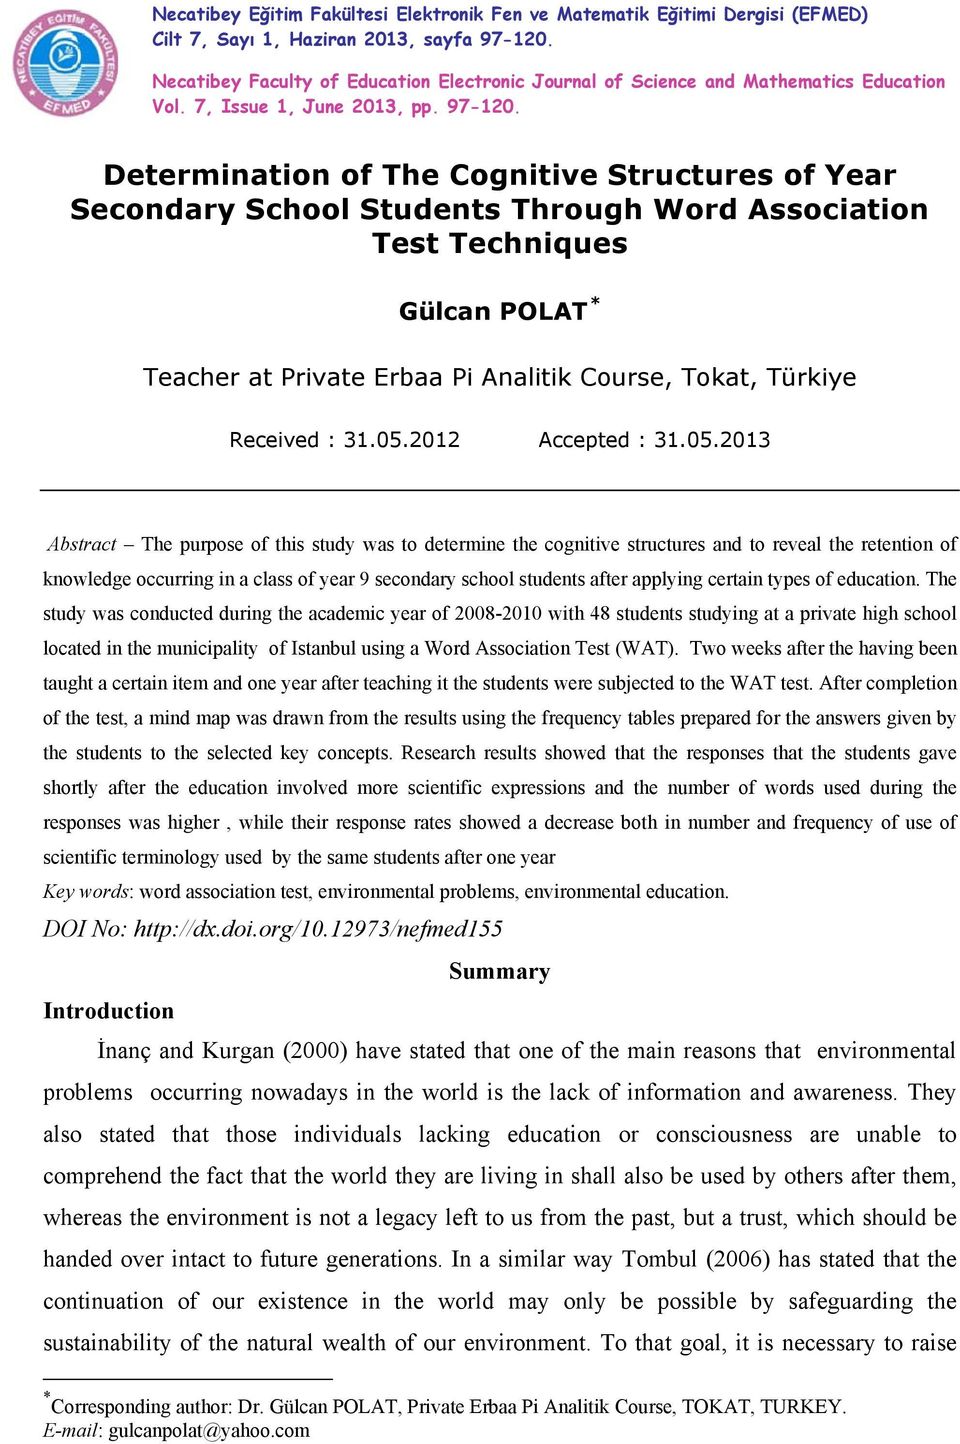 Determination of The Cognitive Structures of Year Secondary School Students Through Word Association Test Techniques Gülcan POLAT * Teacher at Private Erbaa Pi Analitik Course, Tokat, Türkiye